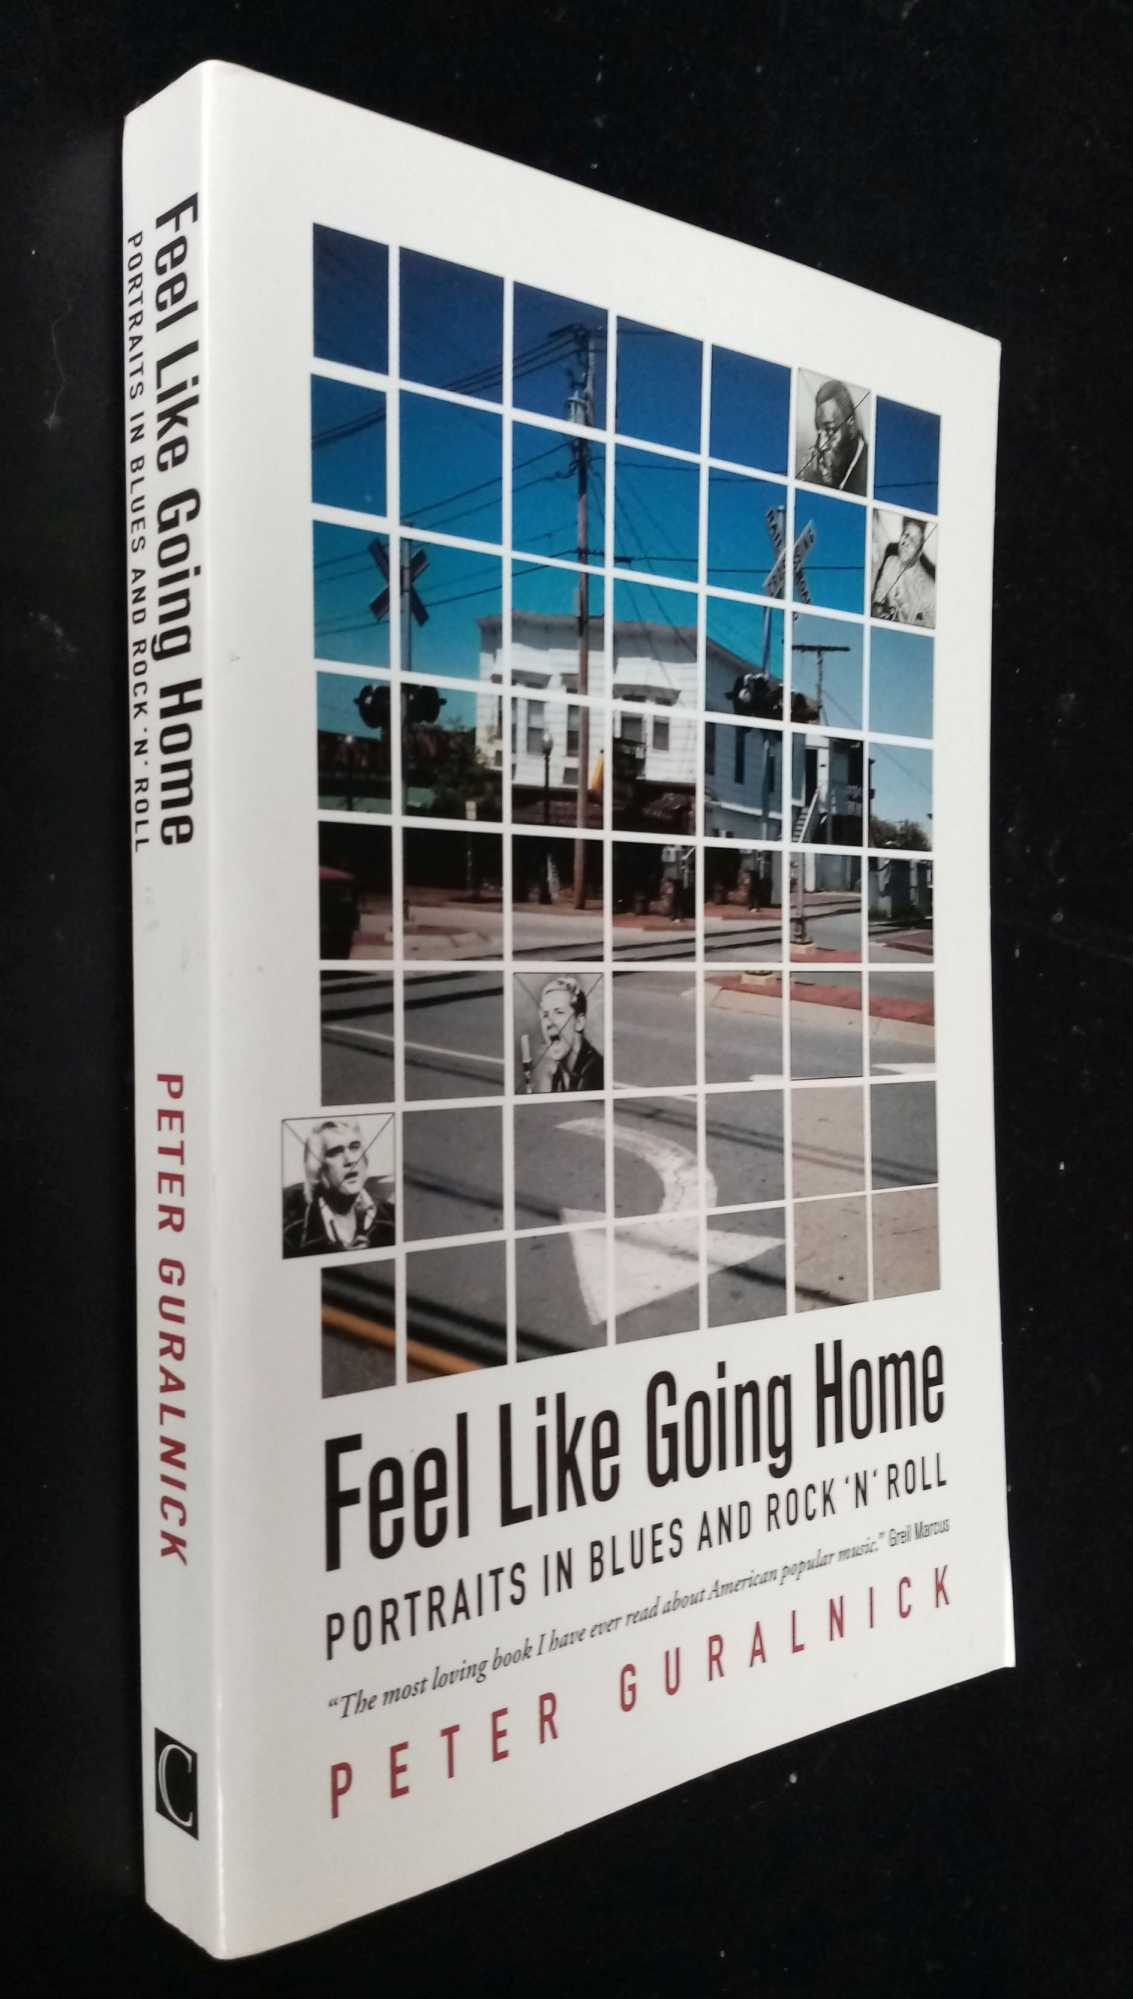 Peter Guralnick - Feel Like Going Home: Portraits in Blues and Rock'n'Roll